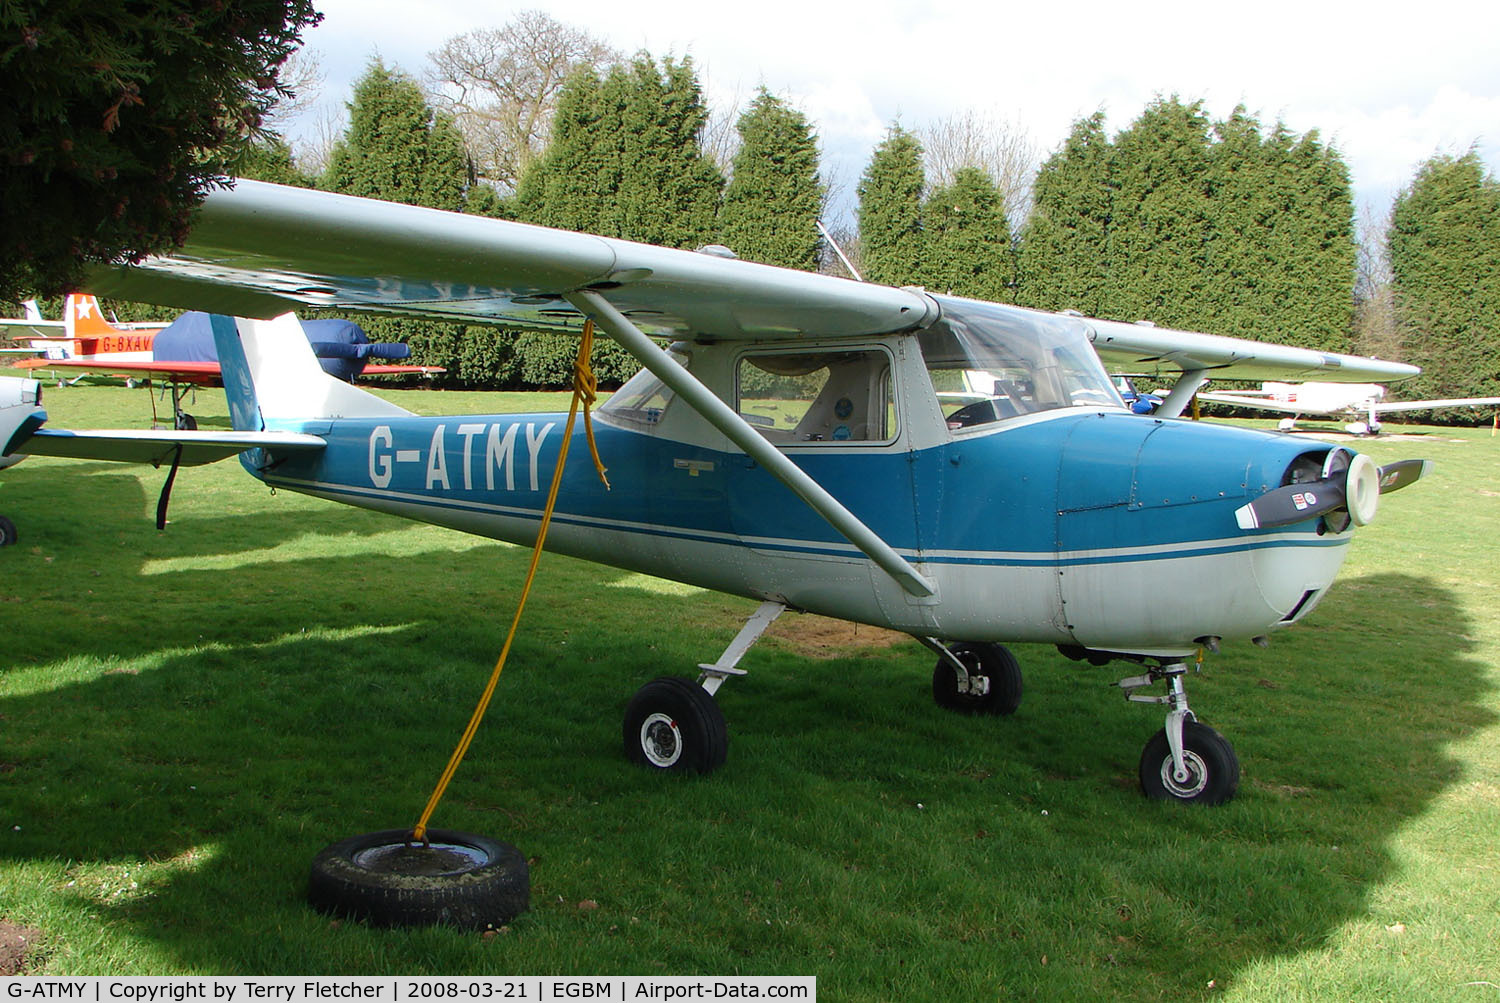 G-ATMY, 1965 Cessna 150F C/N 150-62642, This 1965 Cessna 150F tied down at Tatenhill in March 2008